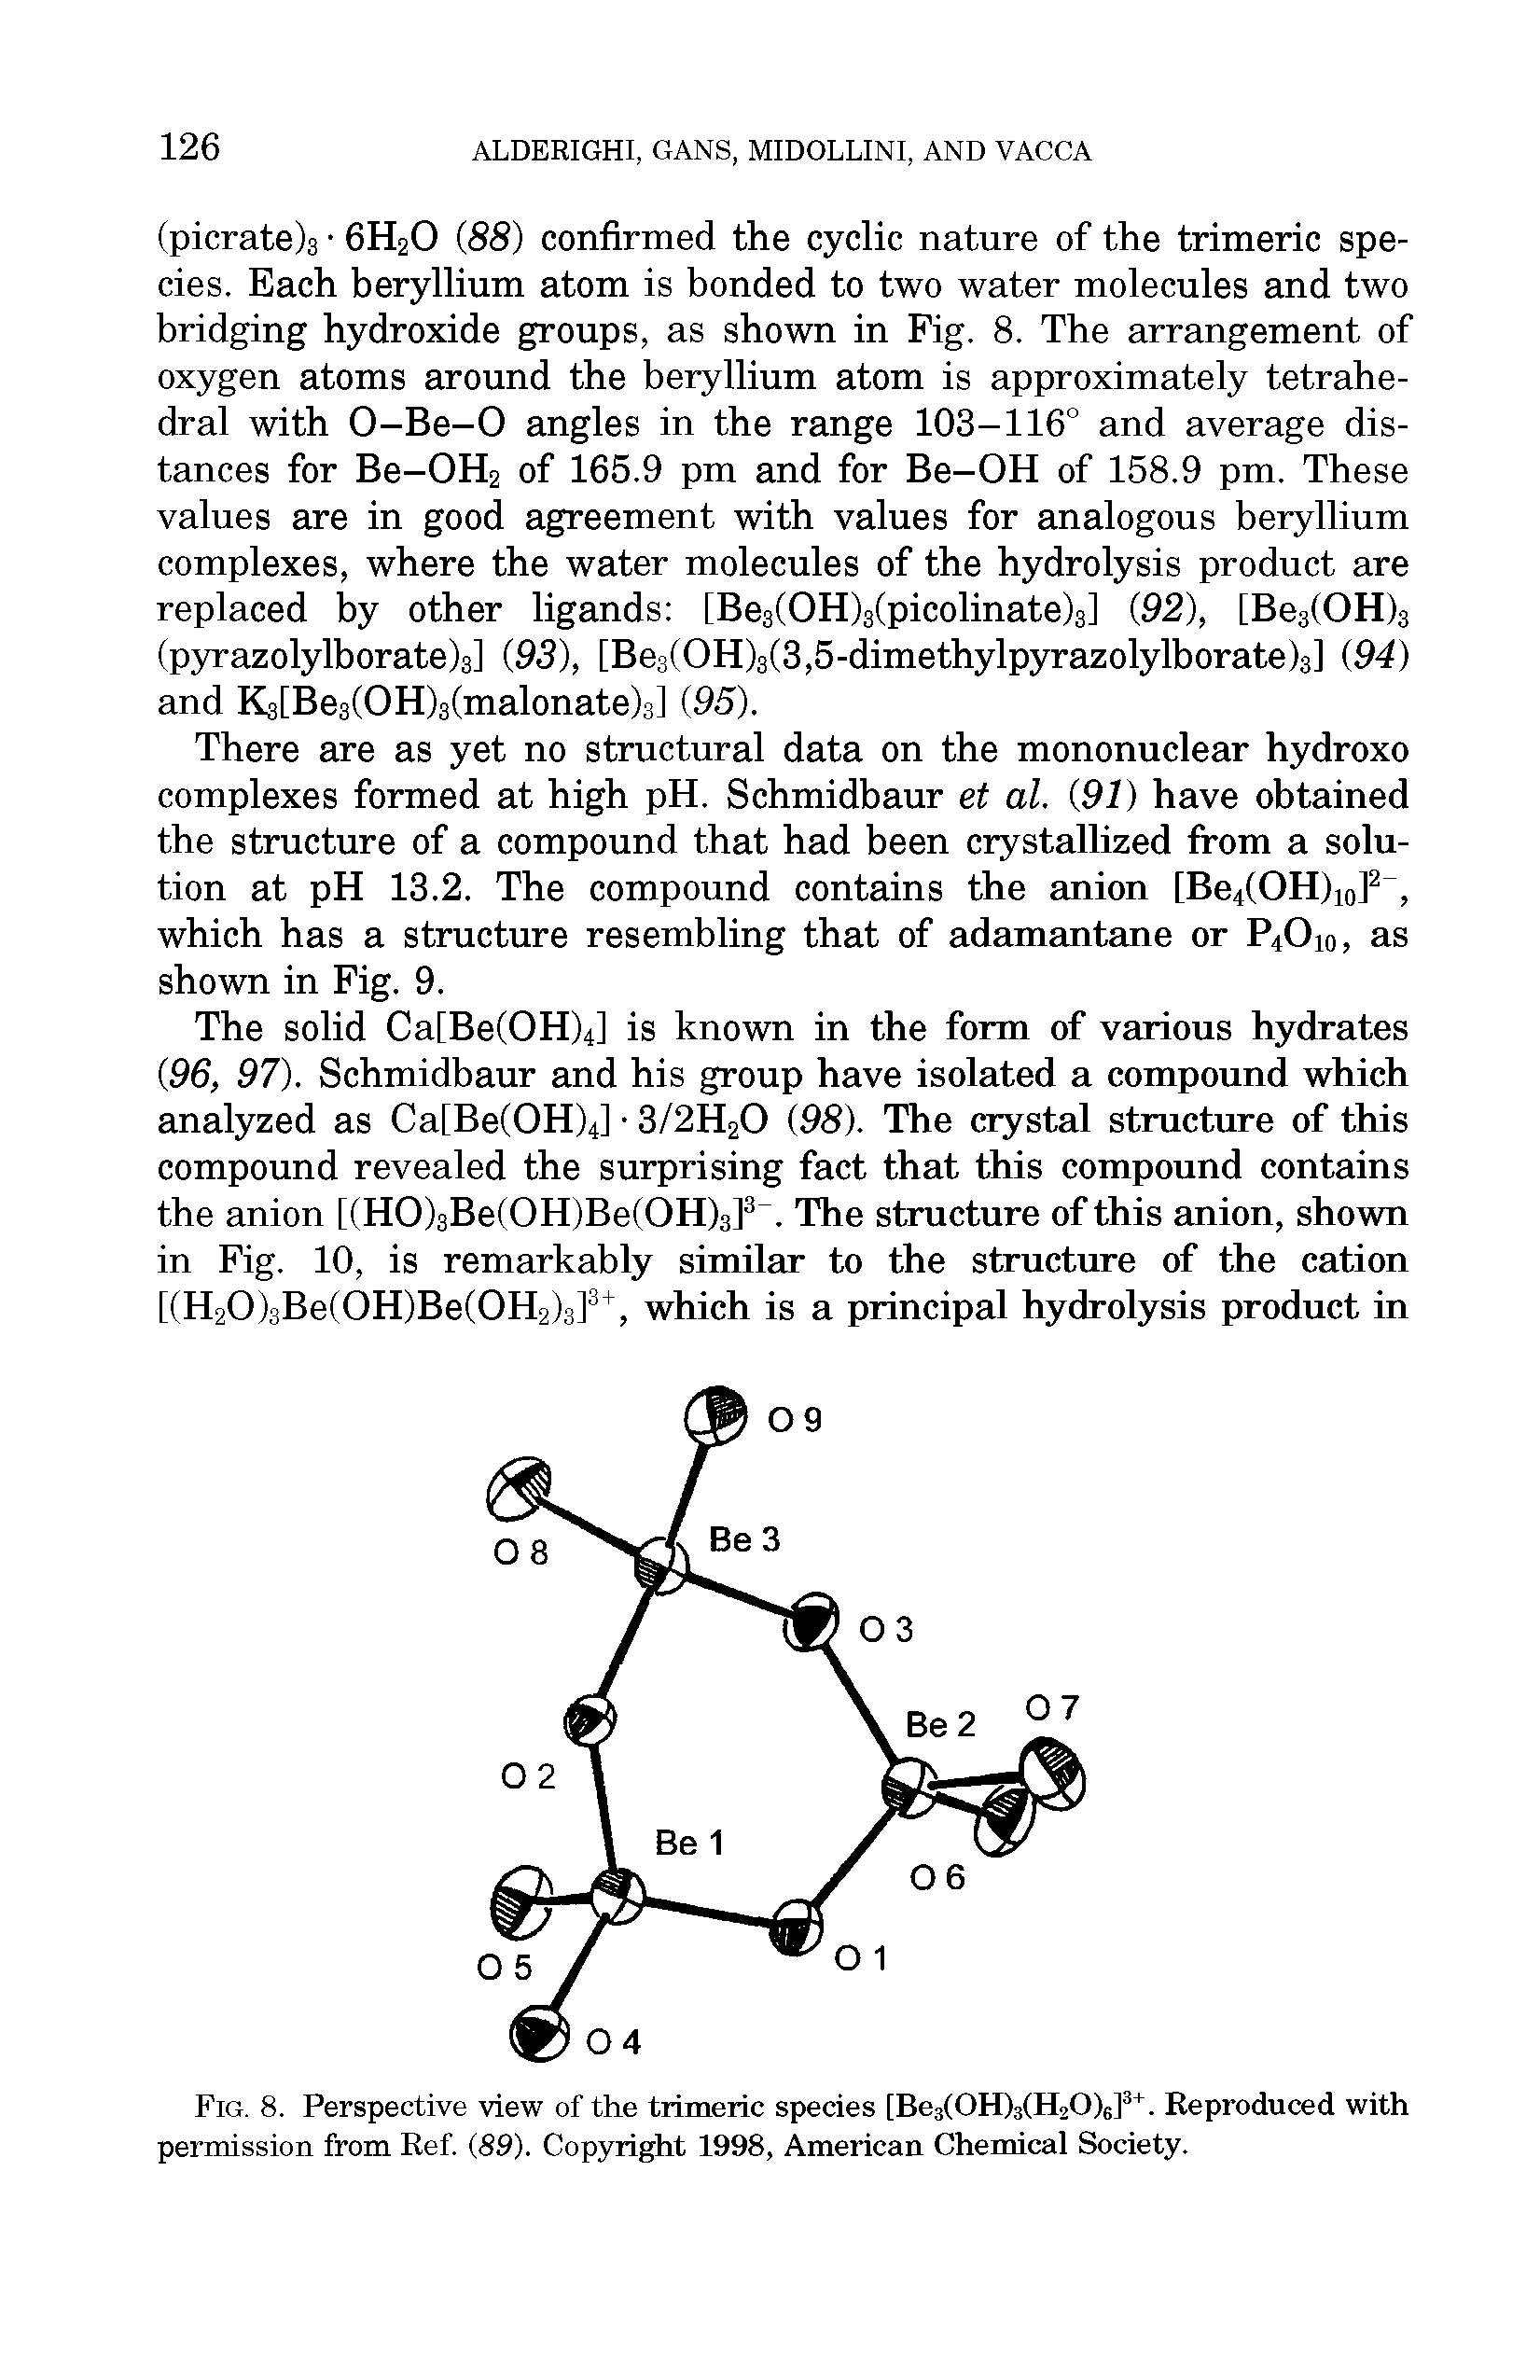 Fig. 8. Perspective view of the trimeric species [Be3(0H)3(H20)6]3+. Reproduced with permission from Ref. (89). Copyright 1998, American Chemical Society.